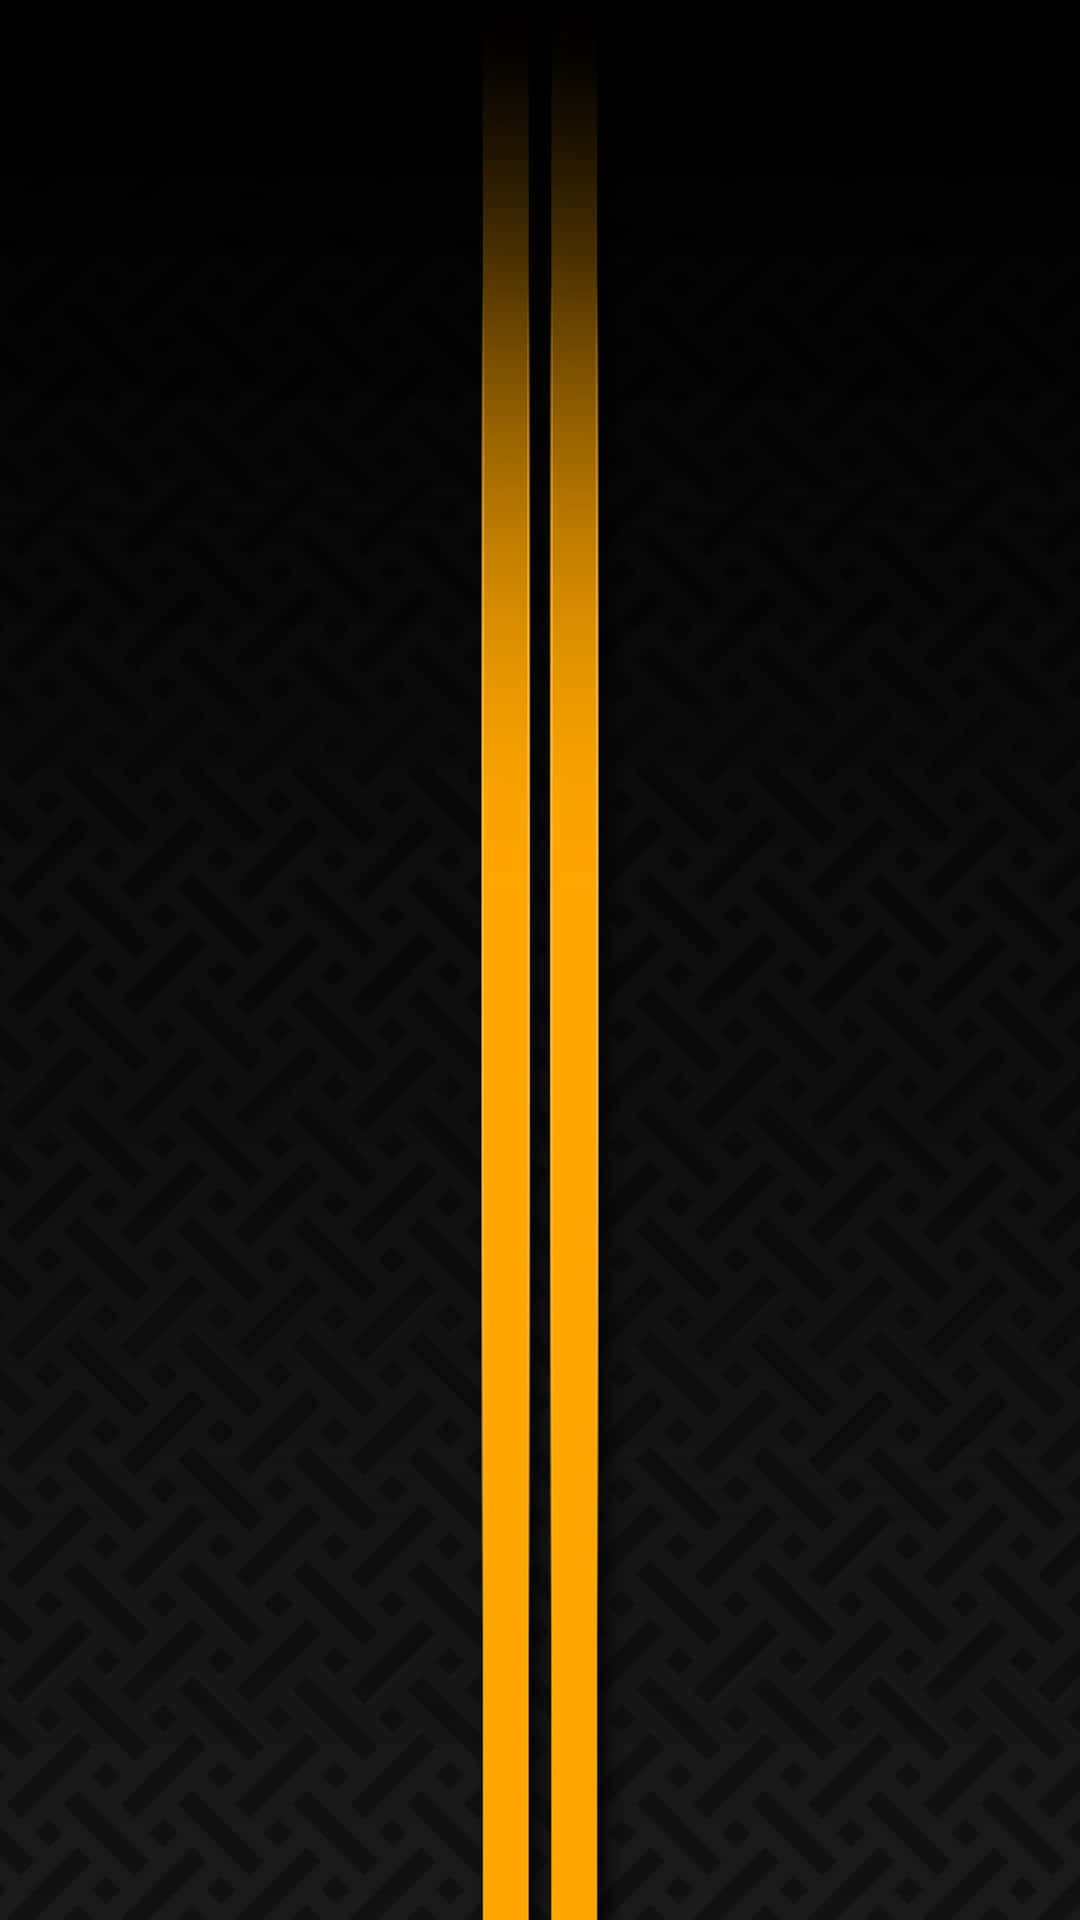 A Yellow And Black Road Line On A Black Background Wallpaper